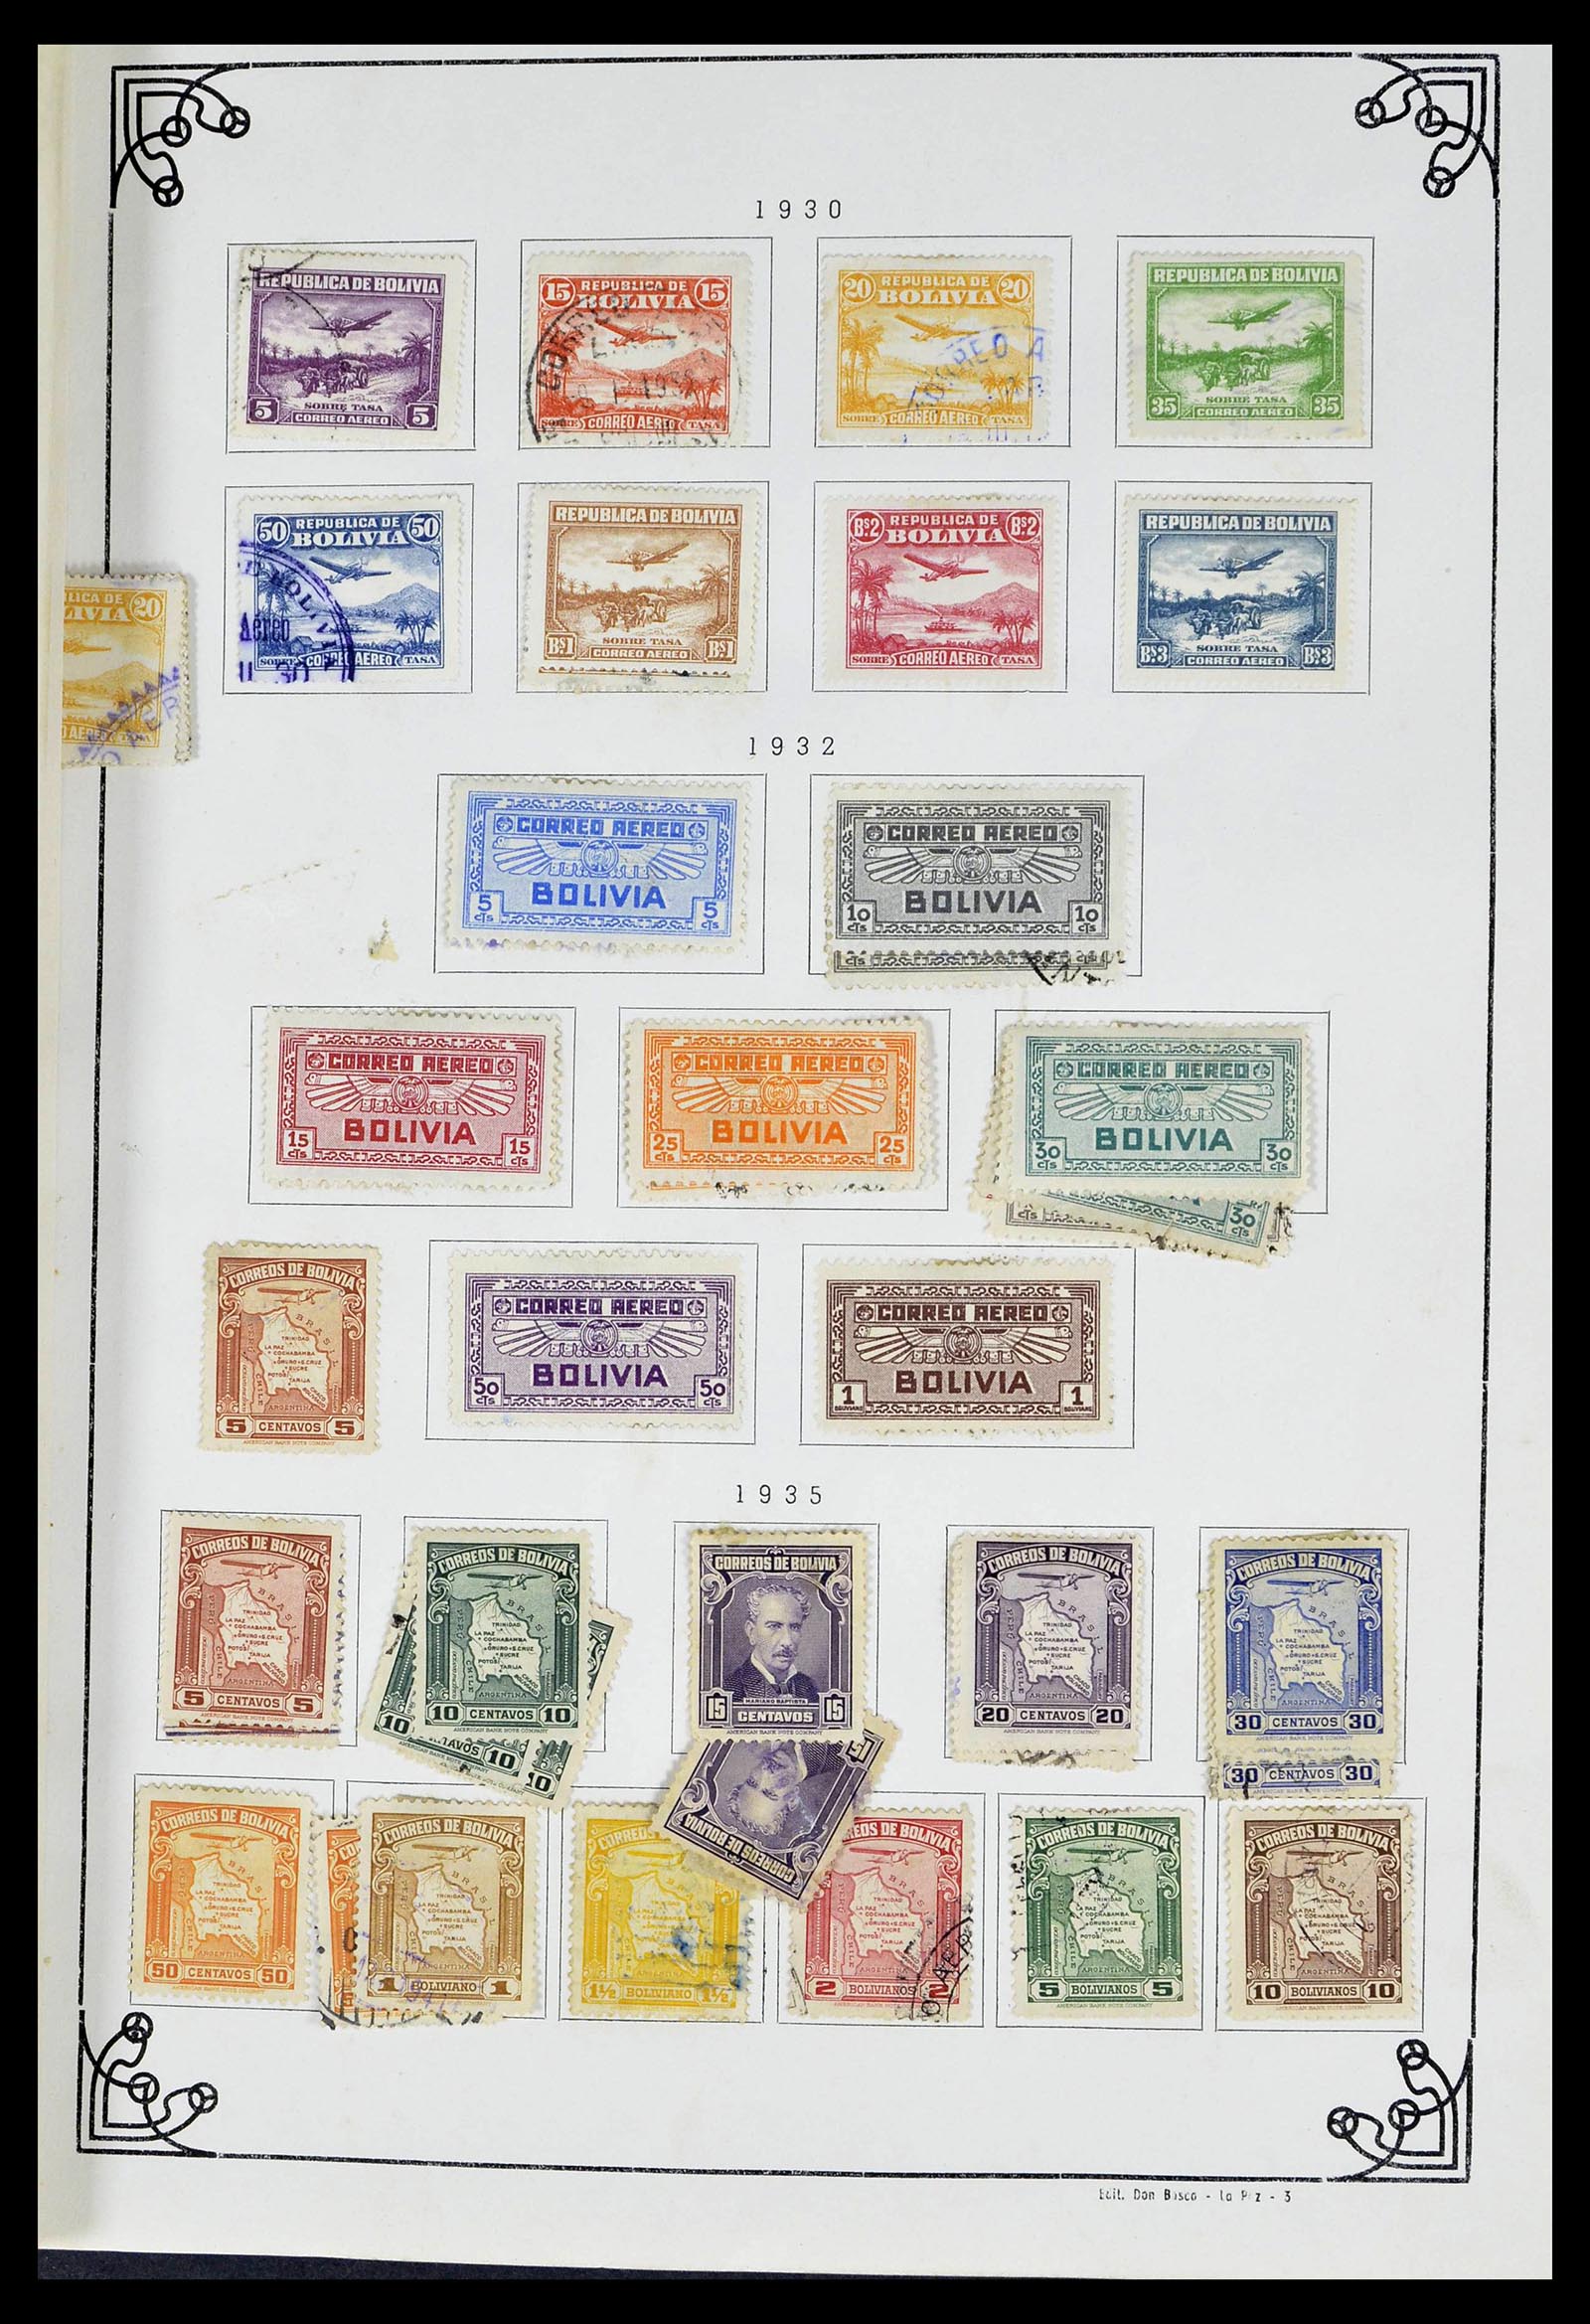 39224 0043 - Stamp collection 39224 Bolivia 1849-1955.